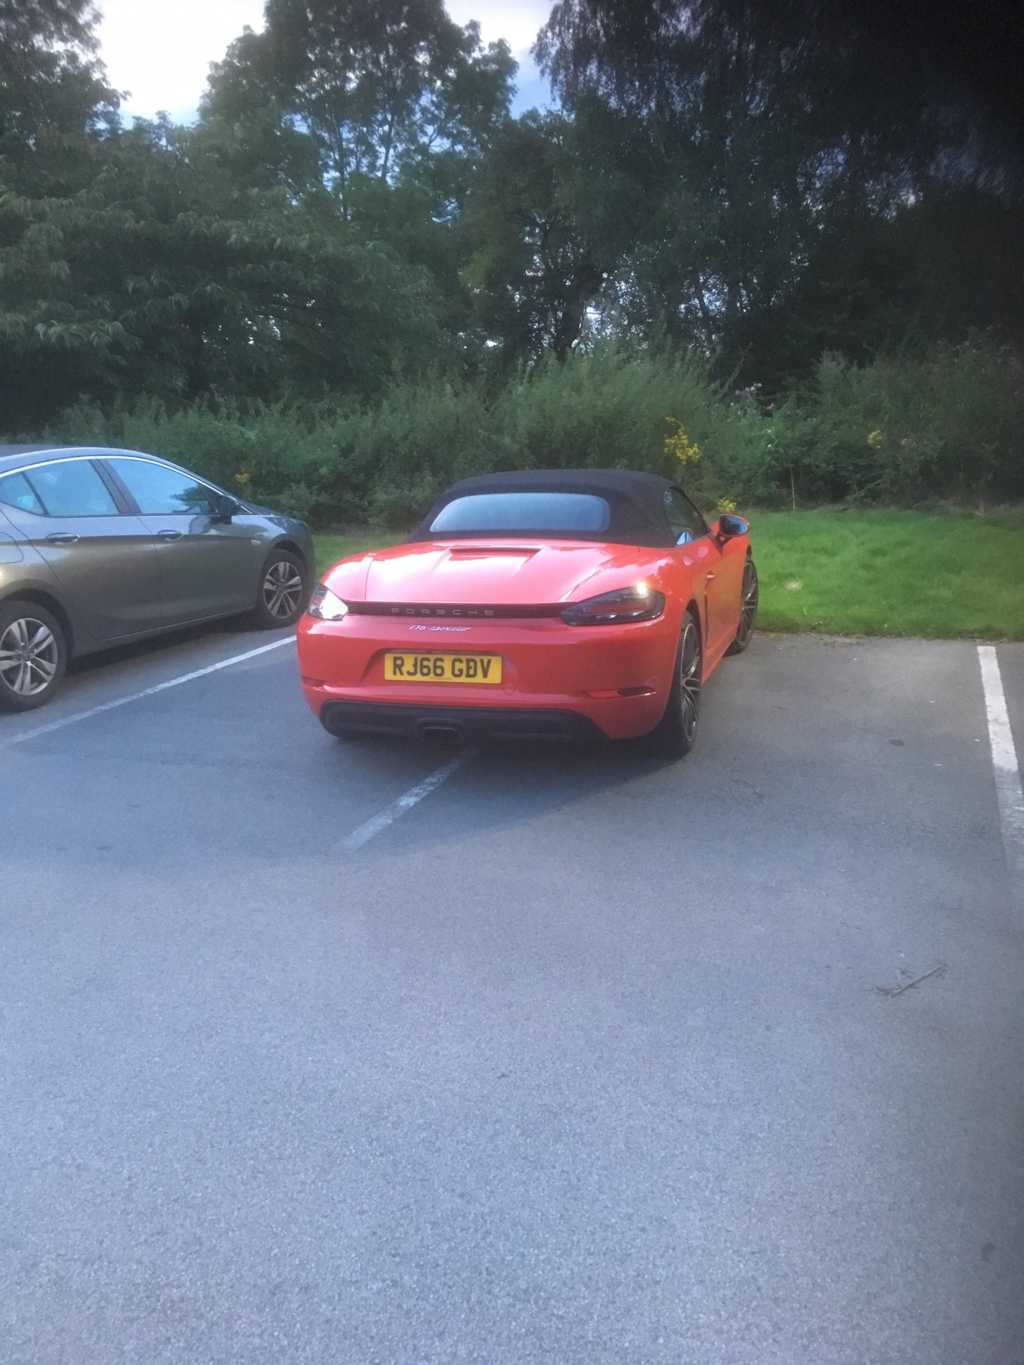 RJ66 GDV is an Inconsiderate Parker